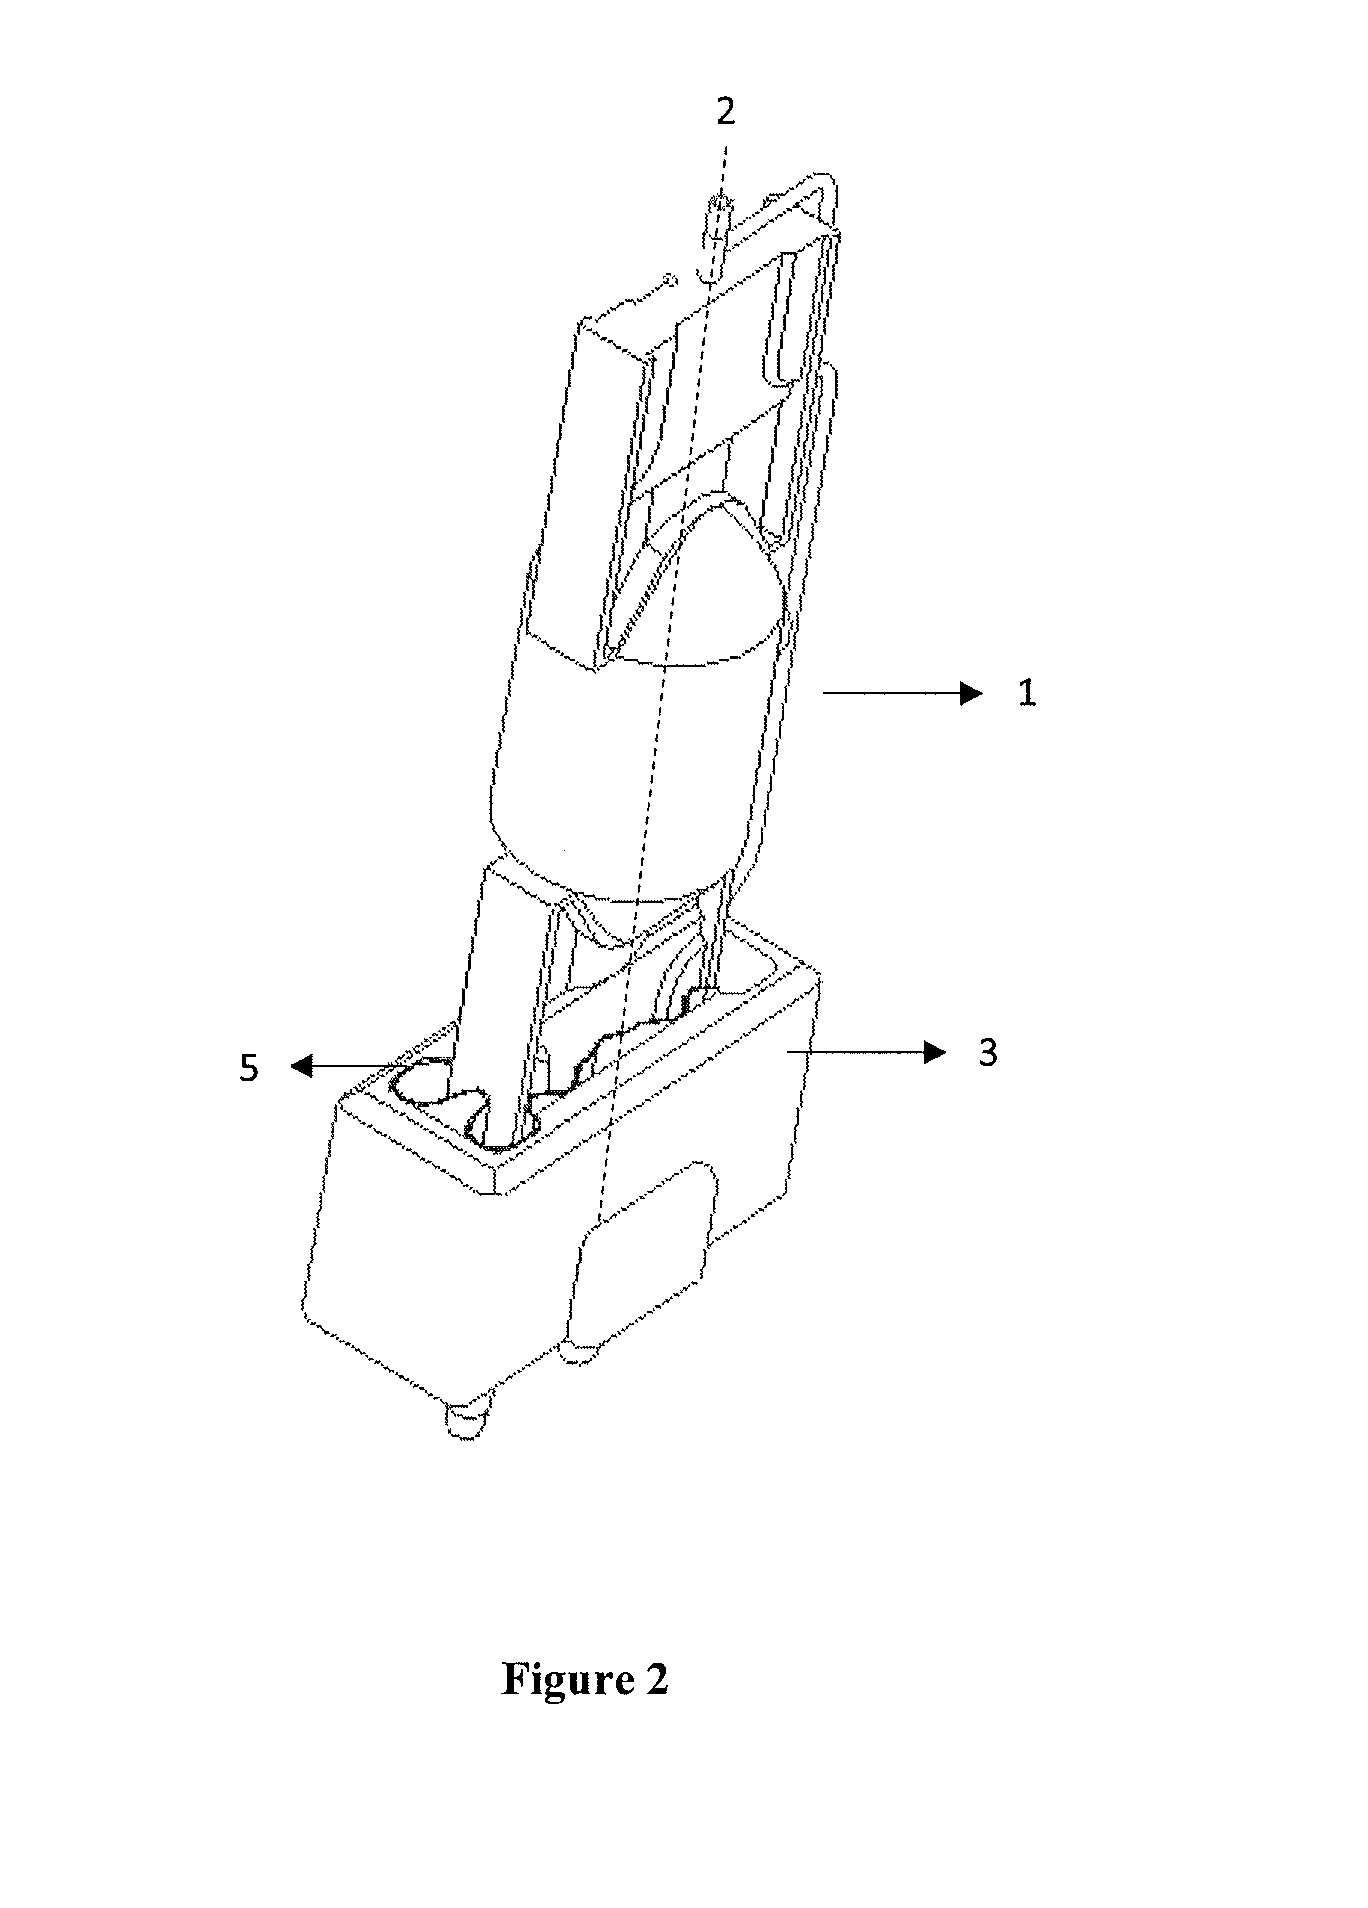 Mounting system for sealing and aligning the burner of the lamp at the centre of its base